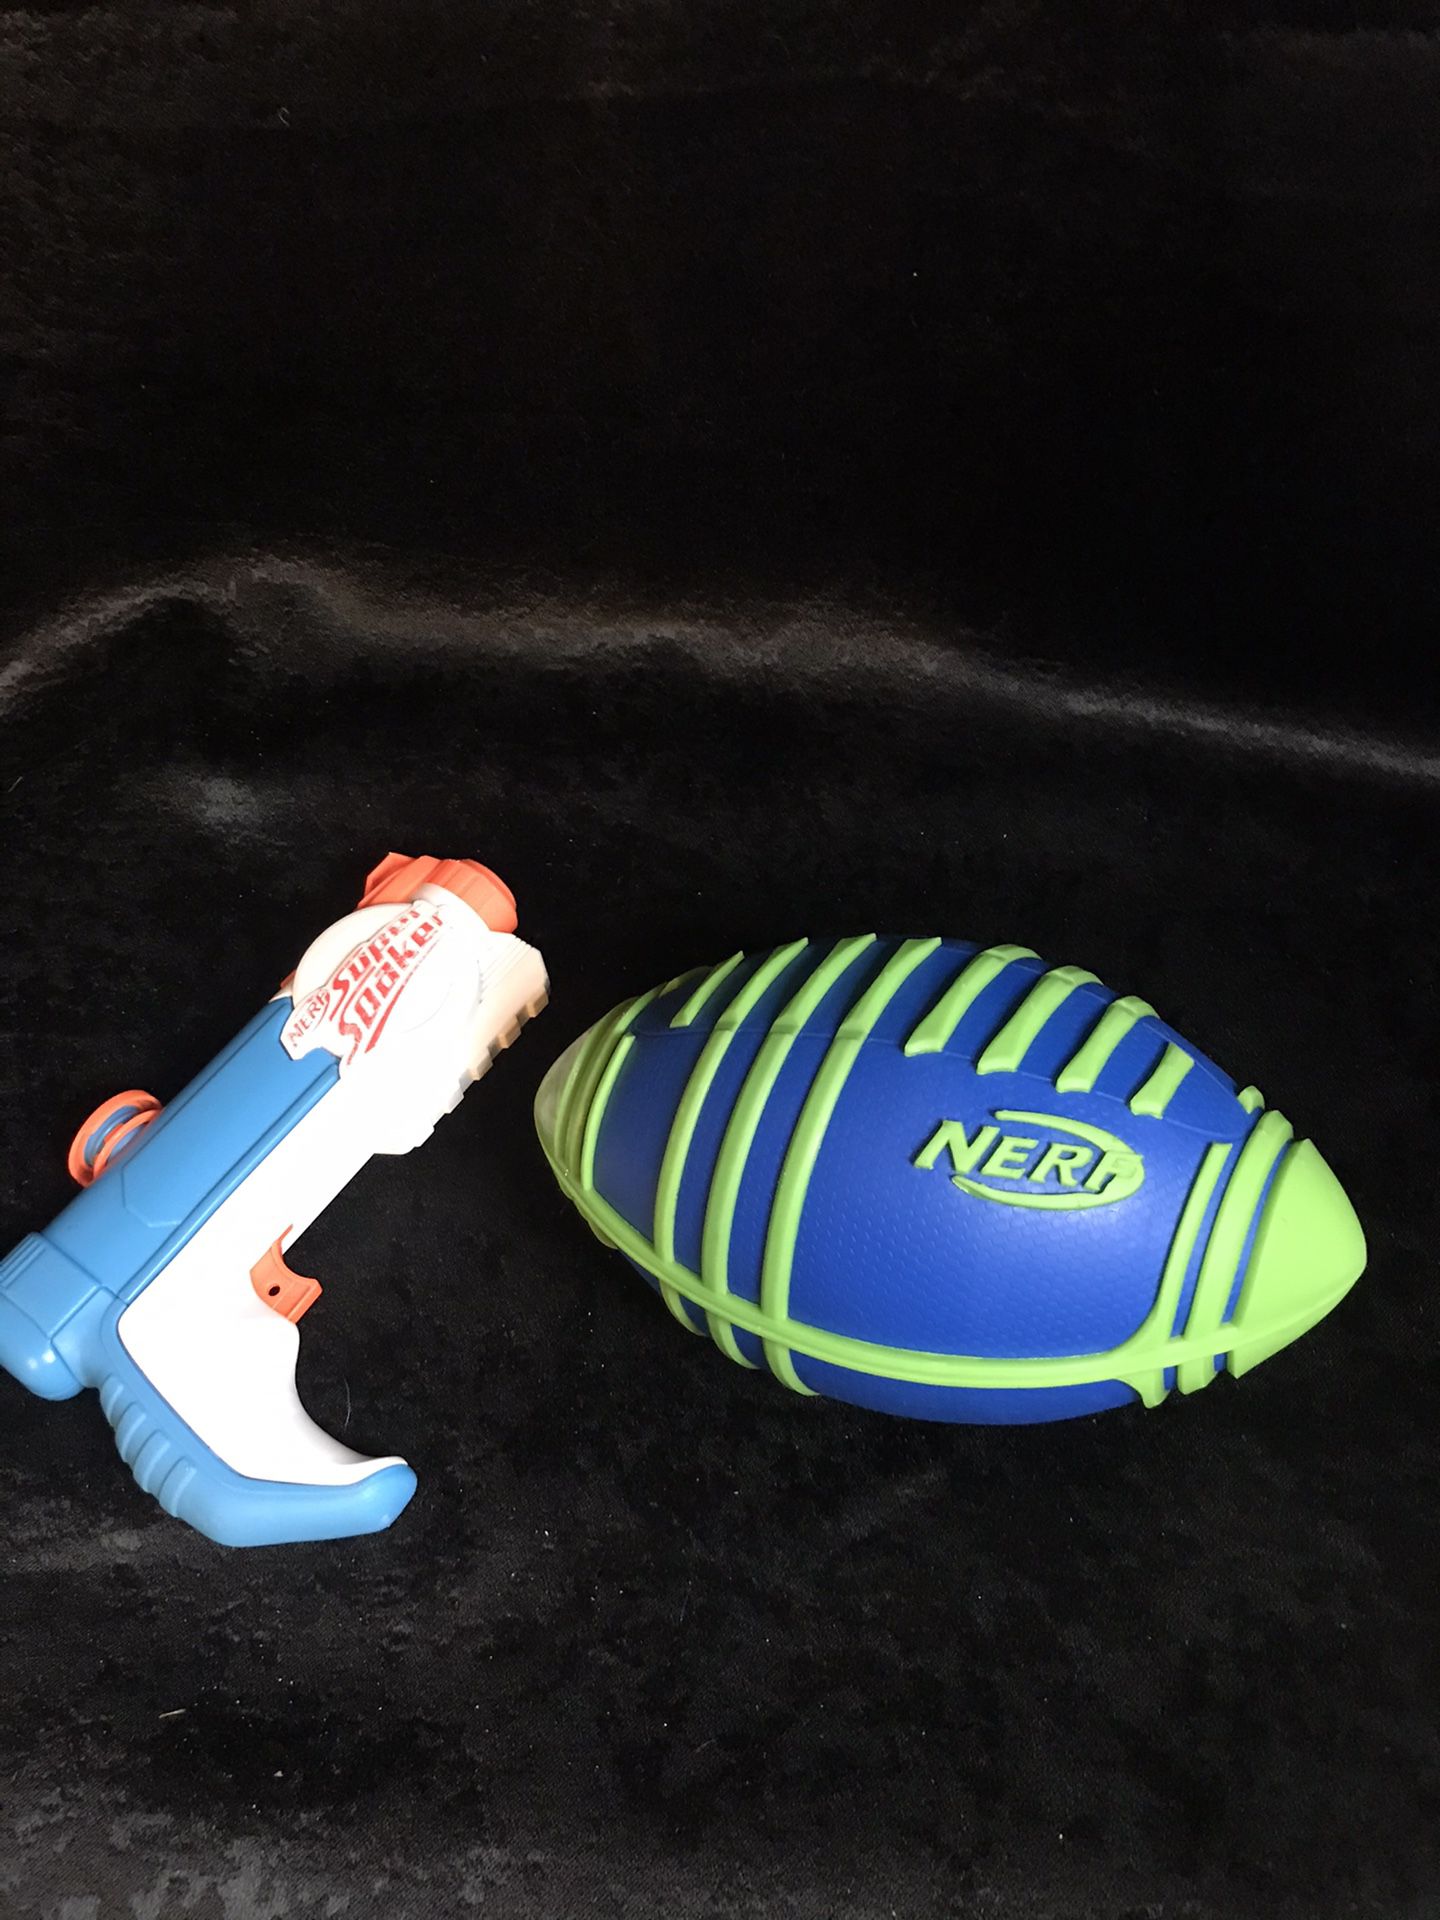 Nerf football/Nerf SuperSoaker!